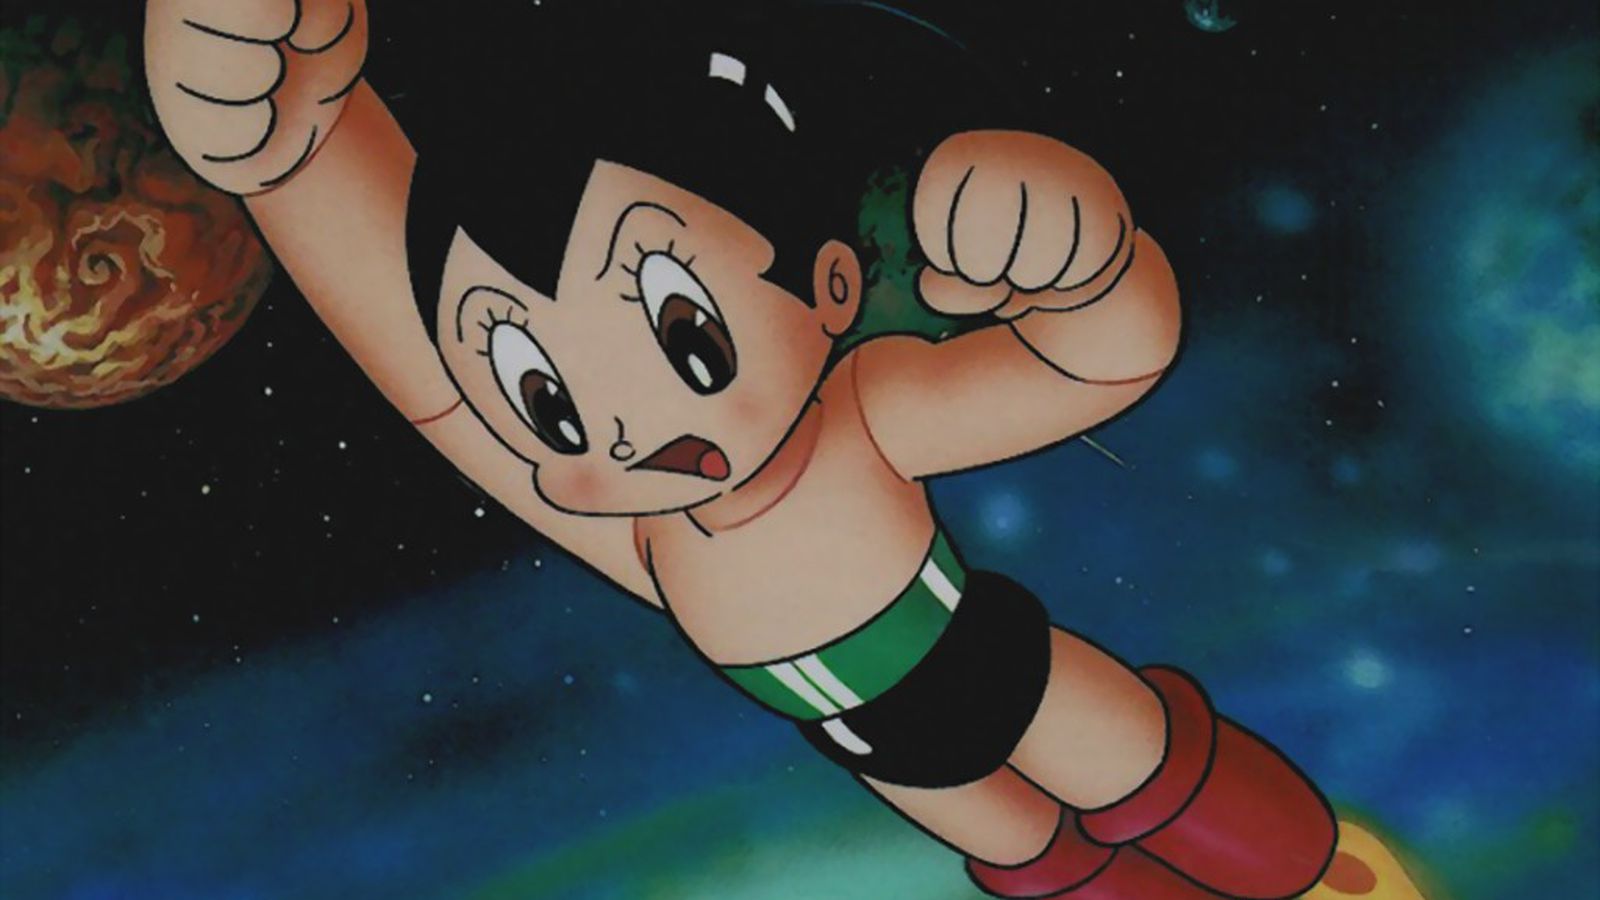 Astro Boy heads to Hollywood with live-action film - Polygon